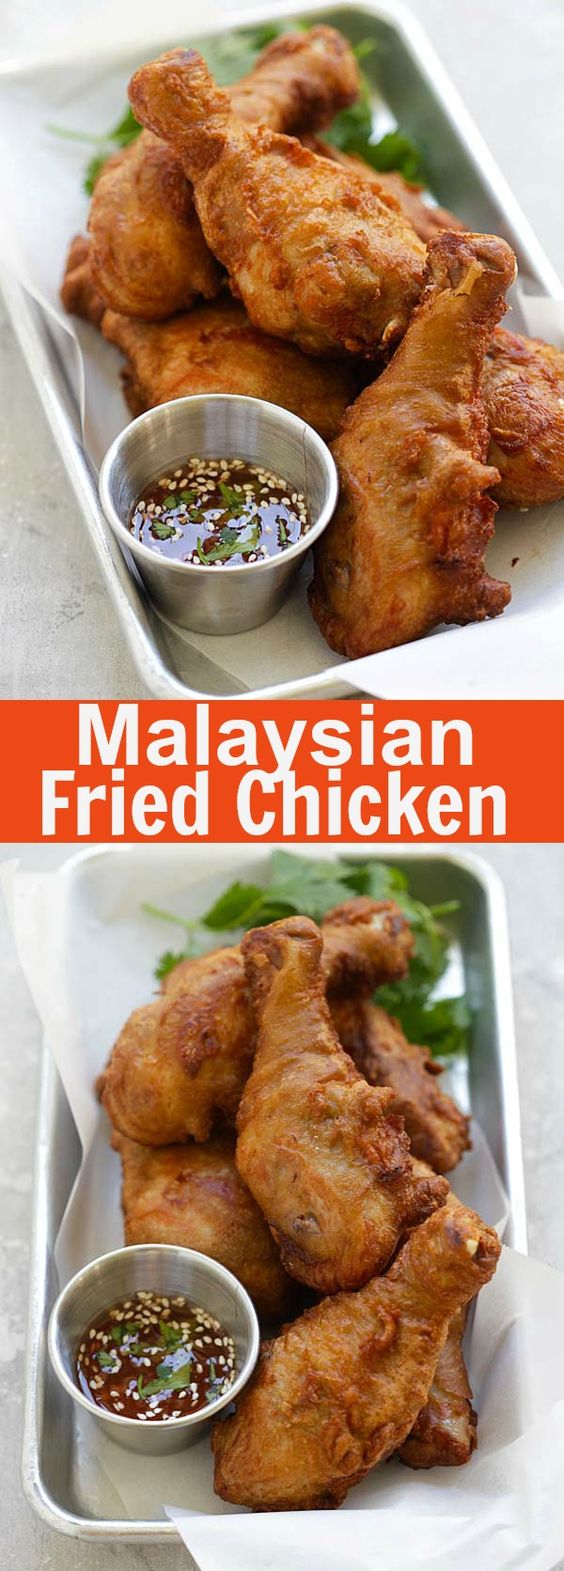 Belacan Fried Chicken - crispy and juicy Malaysian fried chicken marinated with cilantro and Asian seasonings. So delicious | rasamalaysia.com